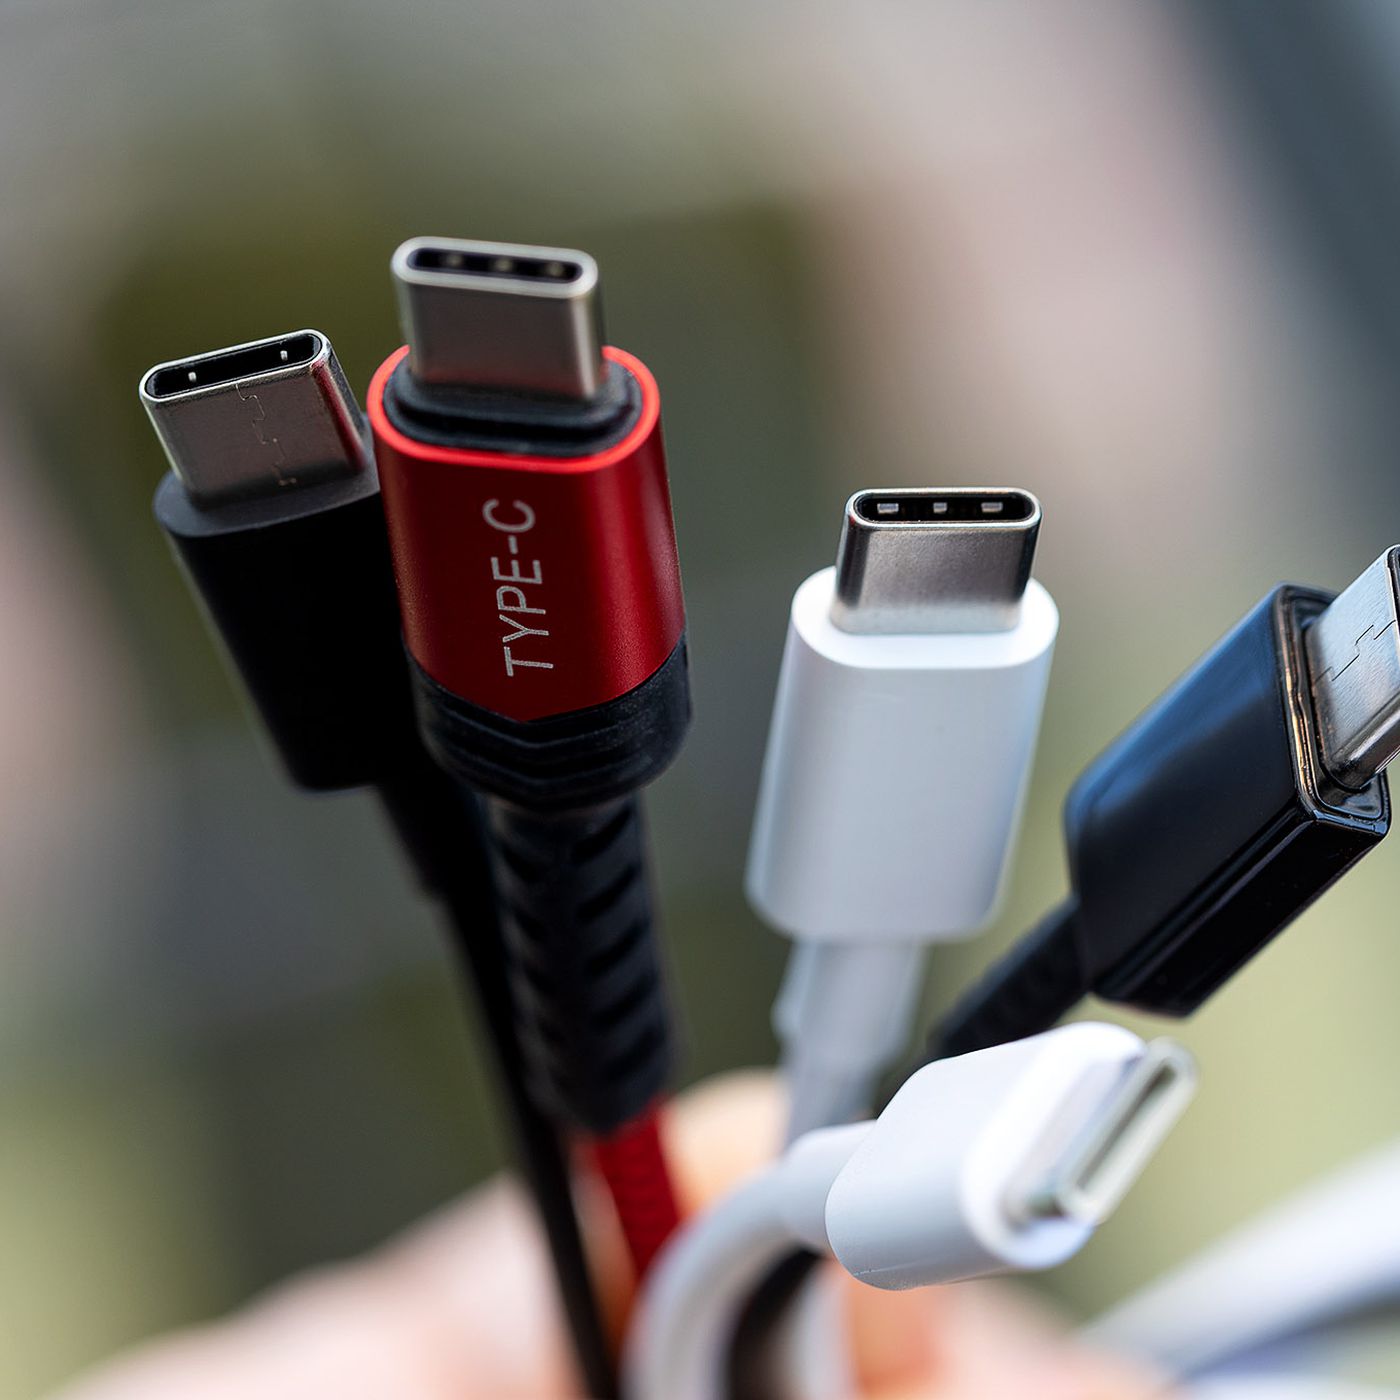 USB-C to be added all devices, including iPhones EU proposes